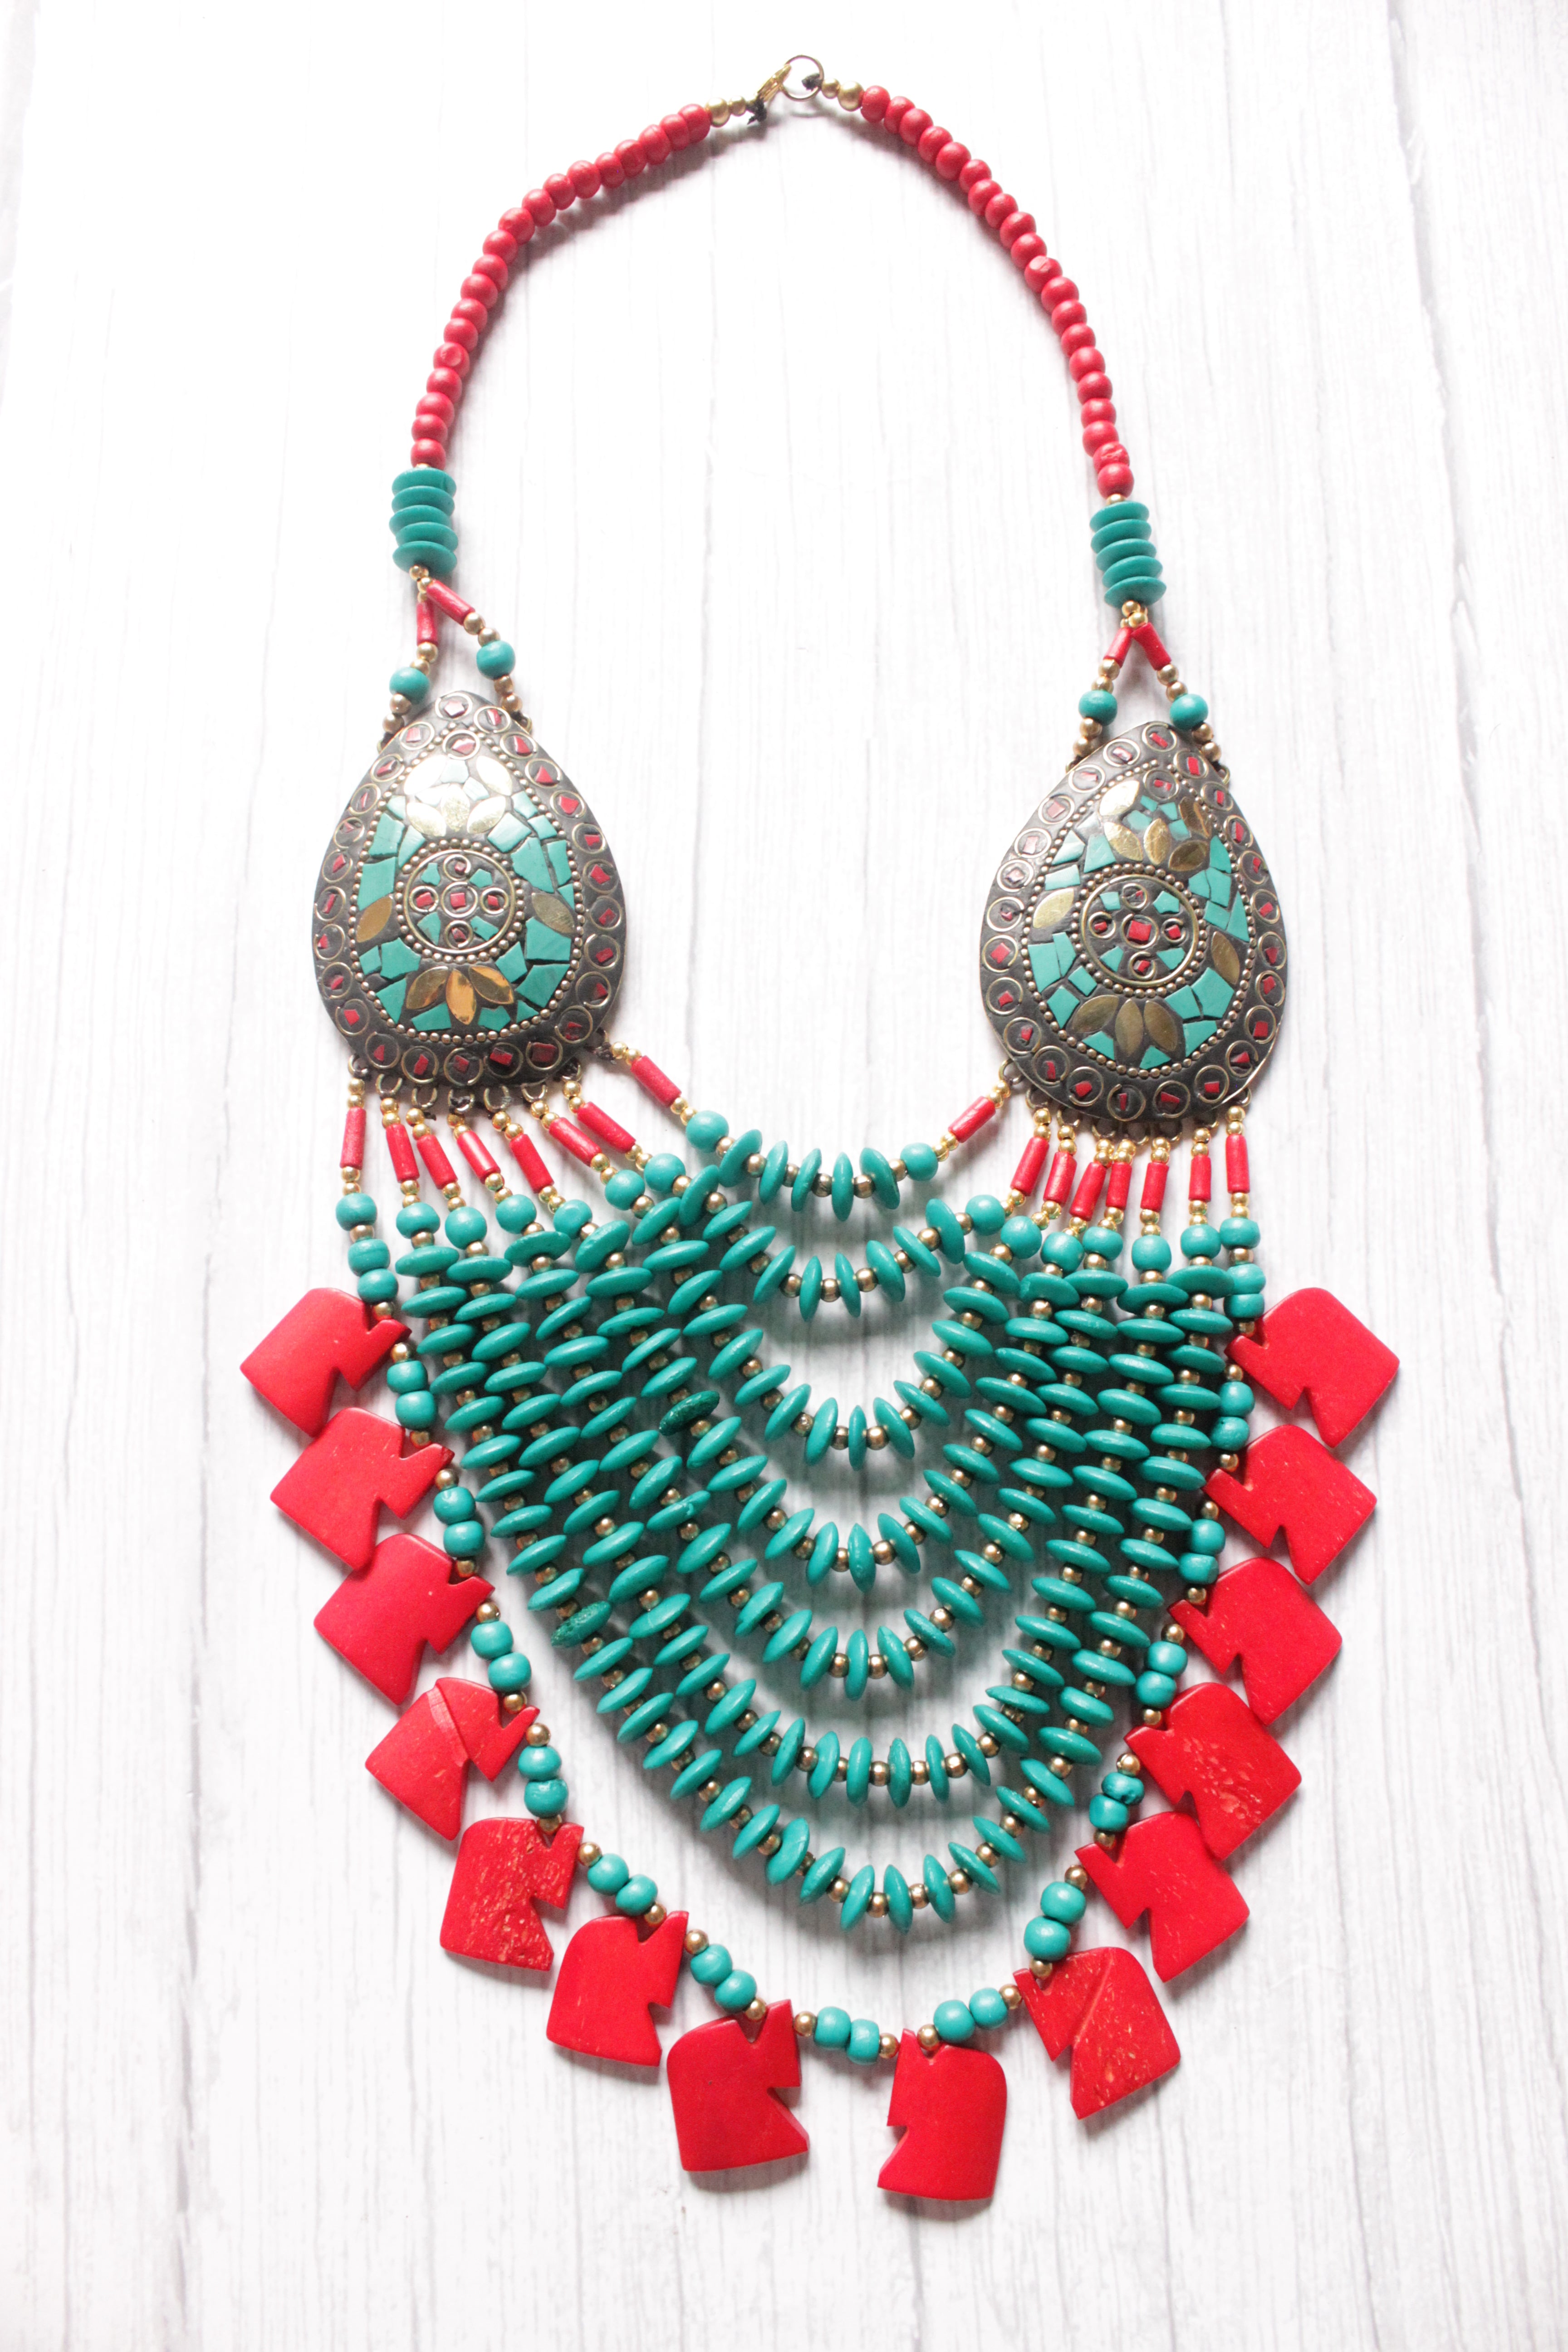 Turquoise & Red Wooden Beads Elephant Charms Tribal Motifs Handcrafted Statement African Tribal Necklace